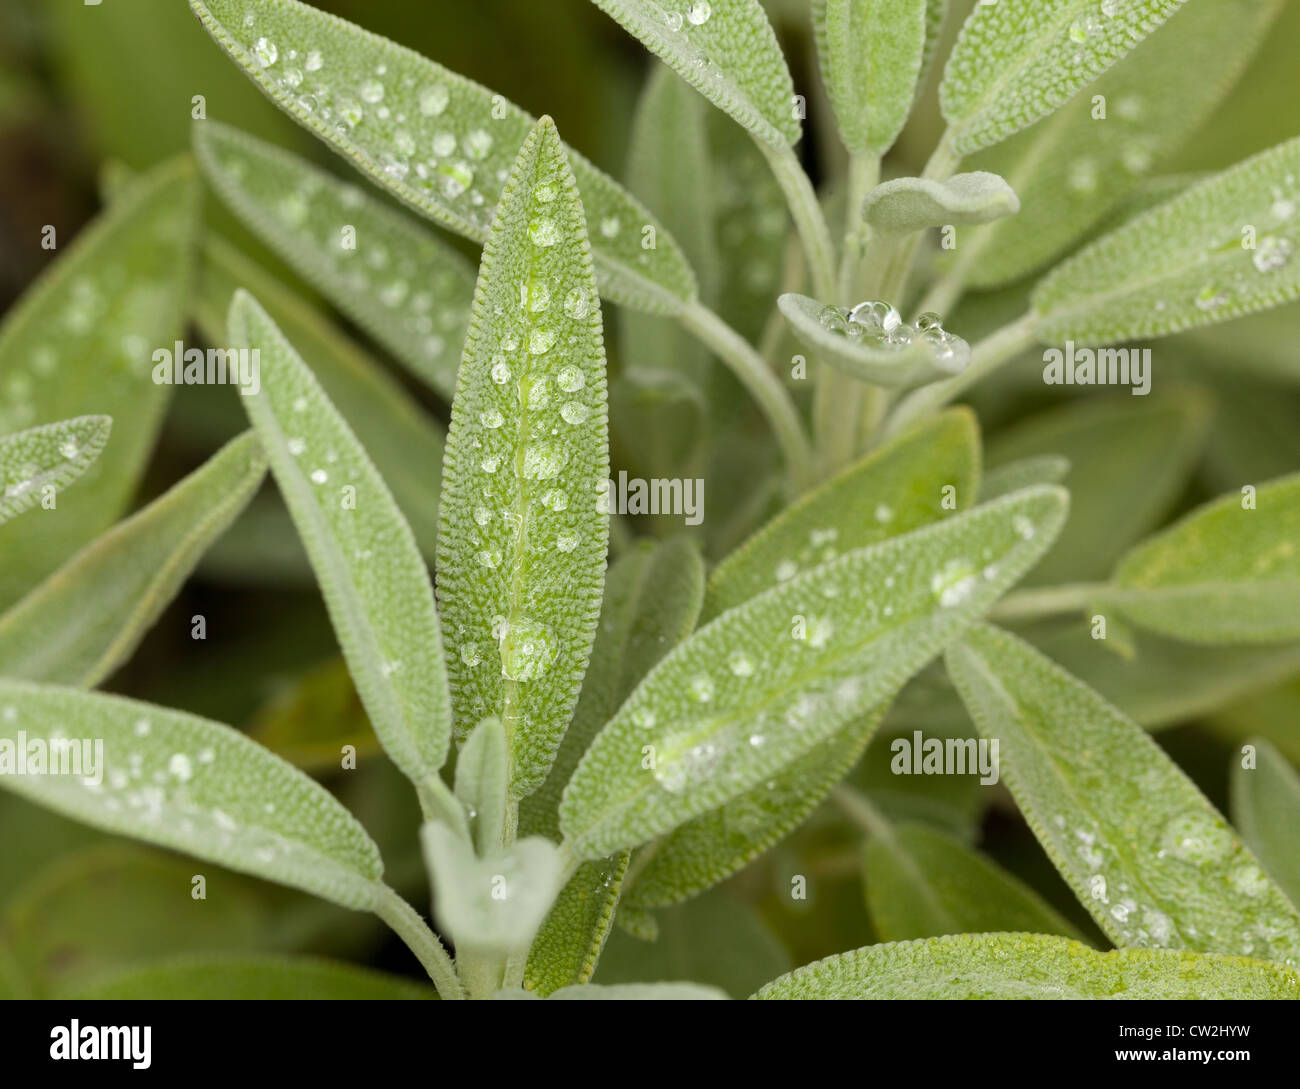 Leaves of Sage plant herb Stock Photo